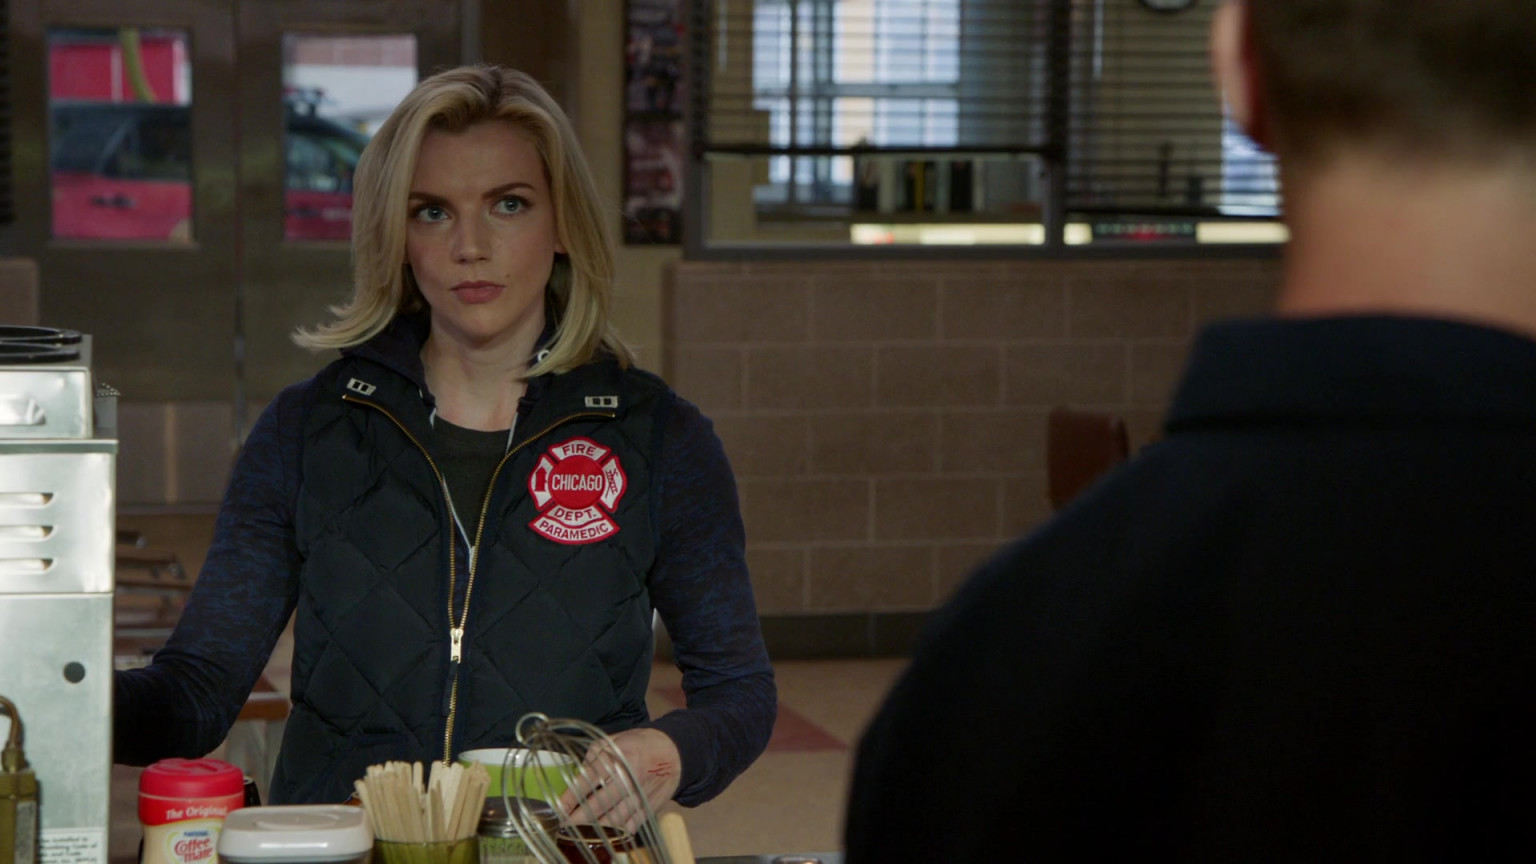 Nestle Coffee Mate Coffee Creamer In Chicago Fire S09e11 A Couple Hundred Degrees 2021